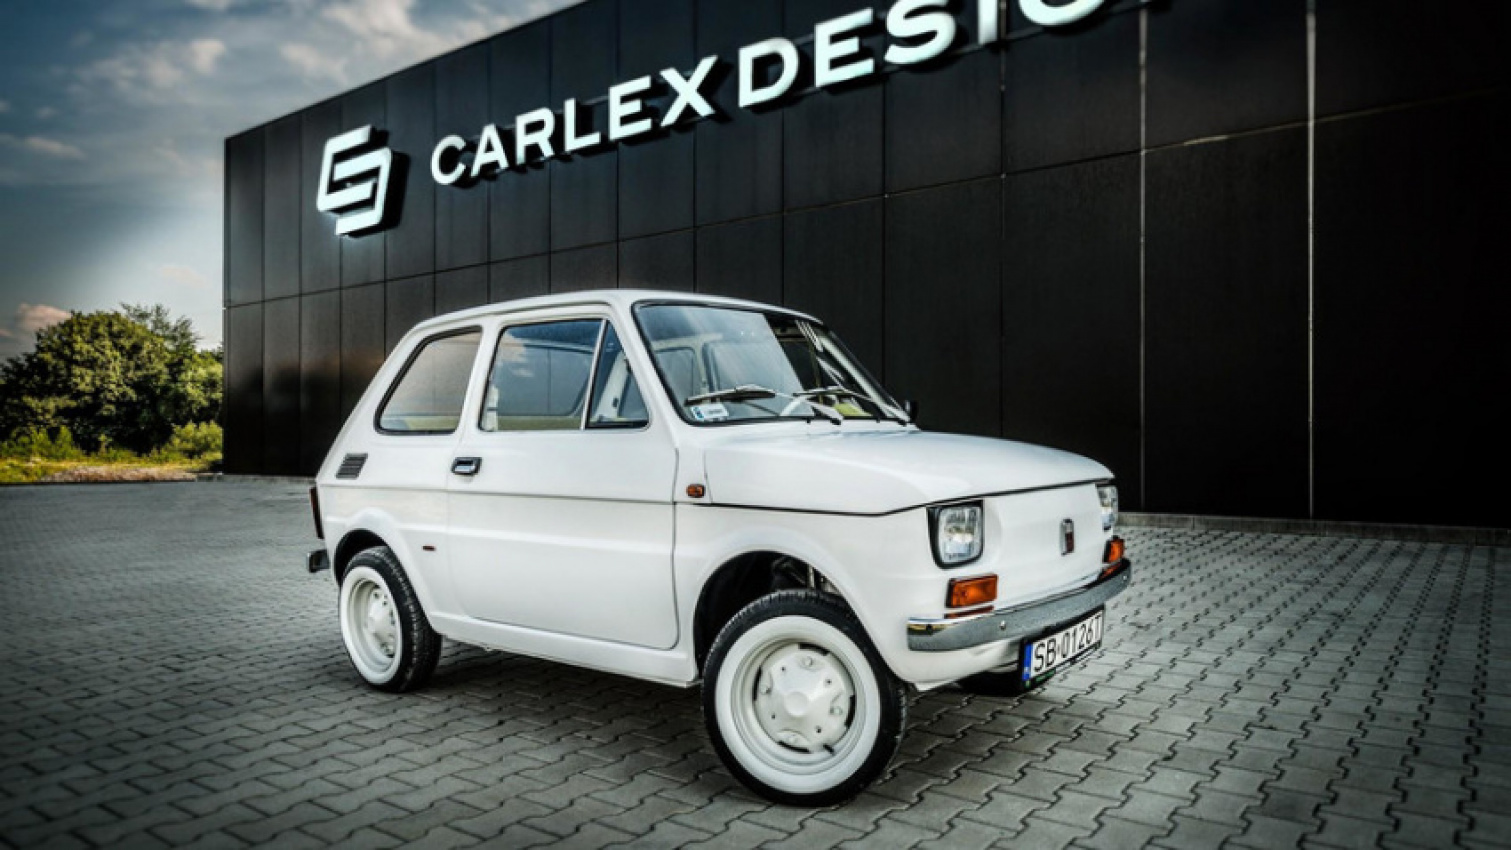 autos, cars, fiat, tom hanks' custom polski fiat 126p sells for $83,500 in charity auction